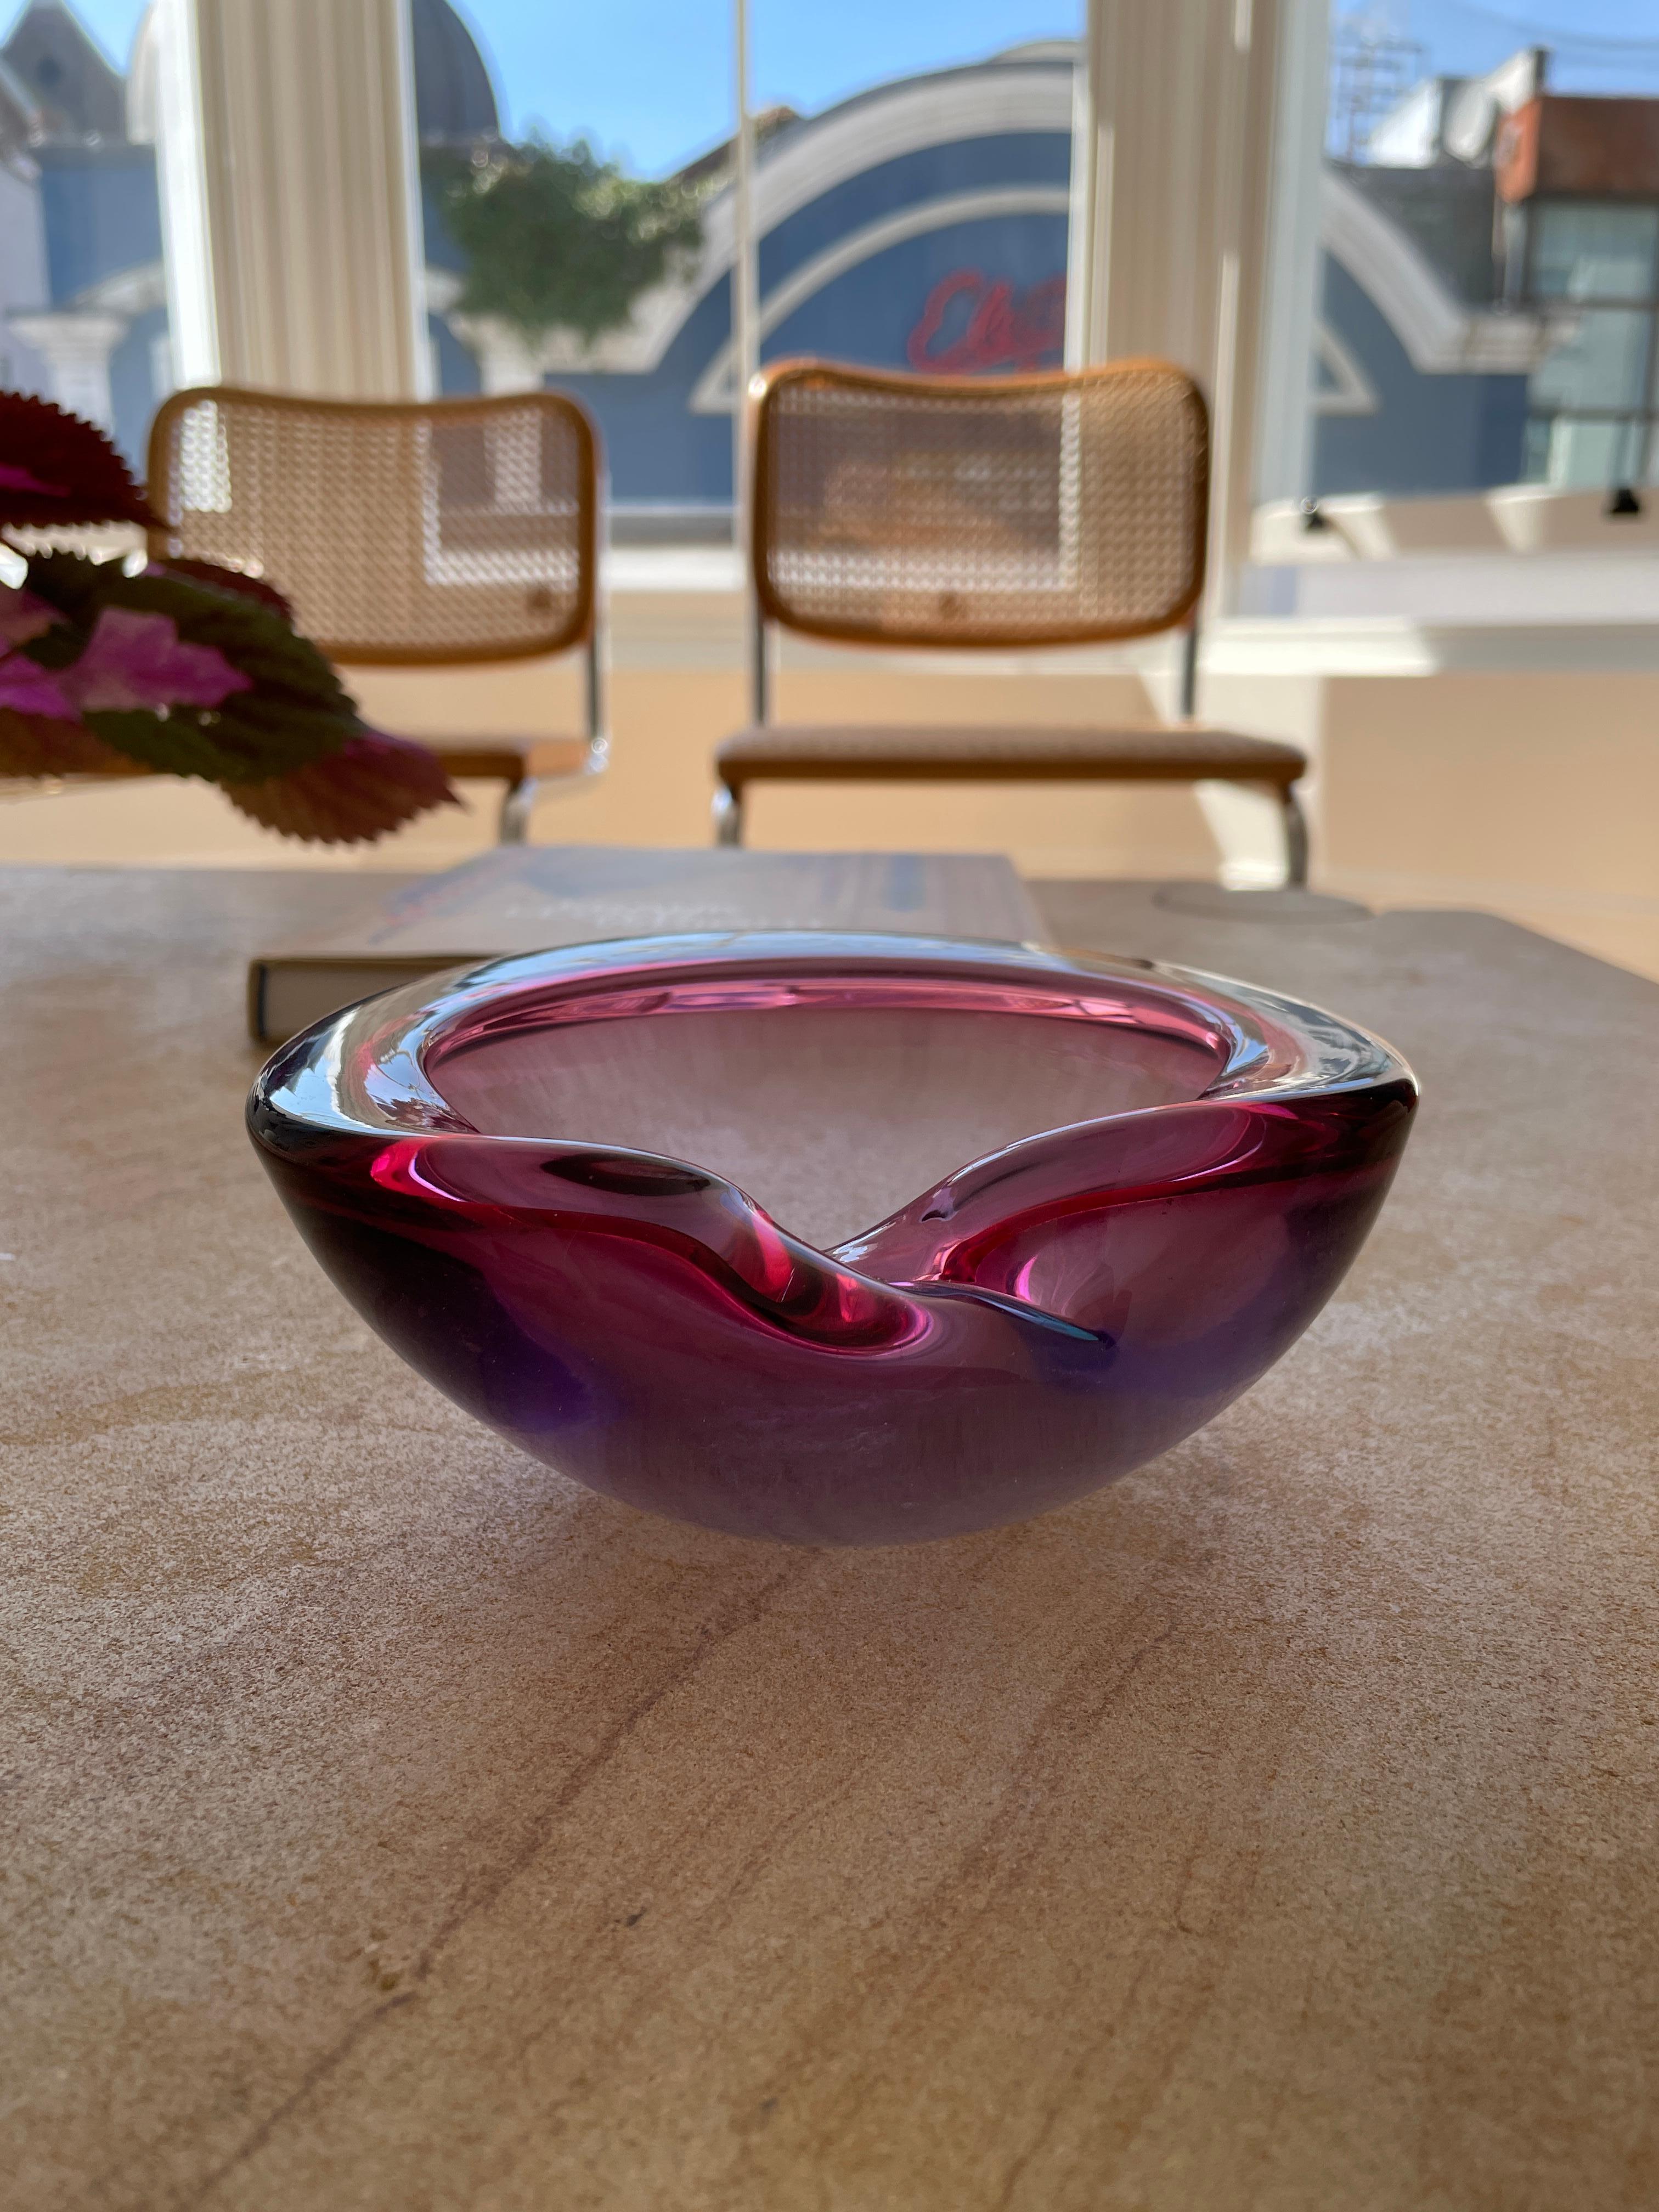 
Height: 6.5cm
Width: 16cm
Depth: 14cm

Designer: Flavio Poli 
Manufacturer: Seguso
Date: 1960s
Materials: Glass

Description: Sommerso Murano Glass Bowl by Flavio Poli Crafted from red and azure glass. The colours of the glass changes with the use